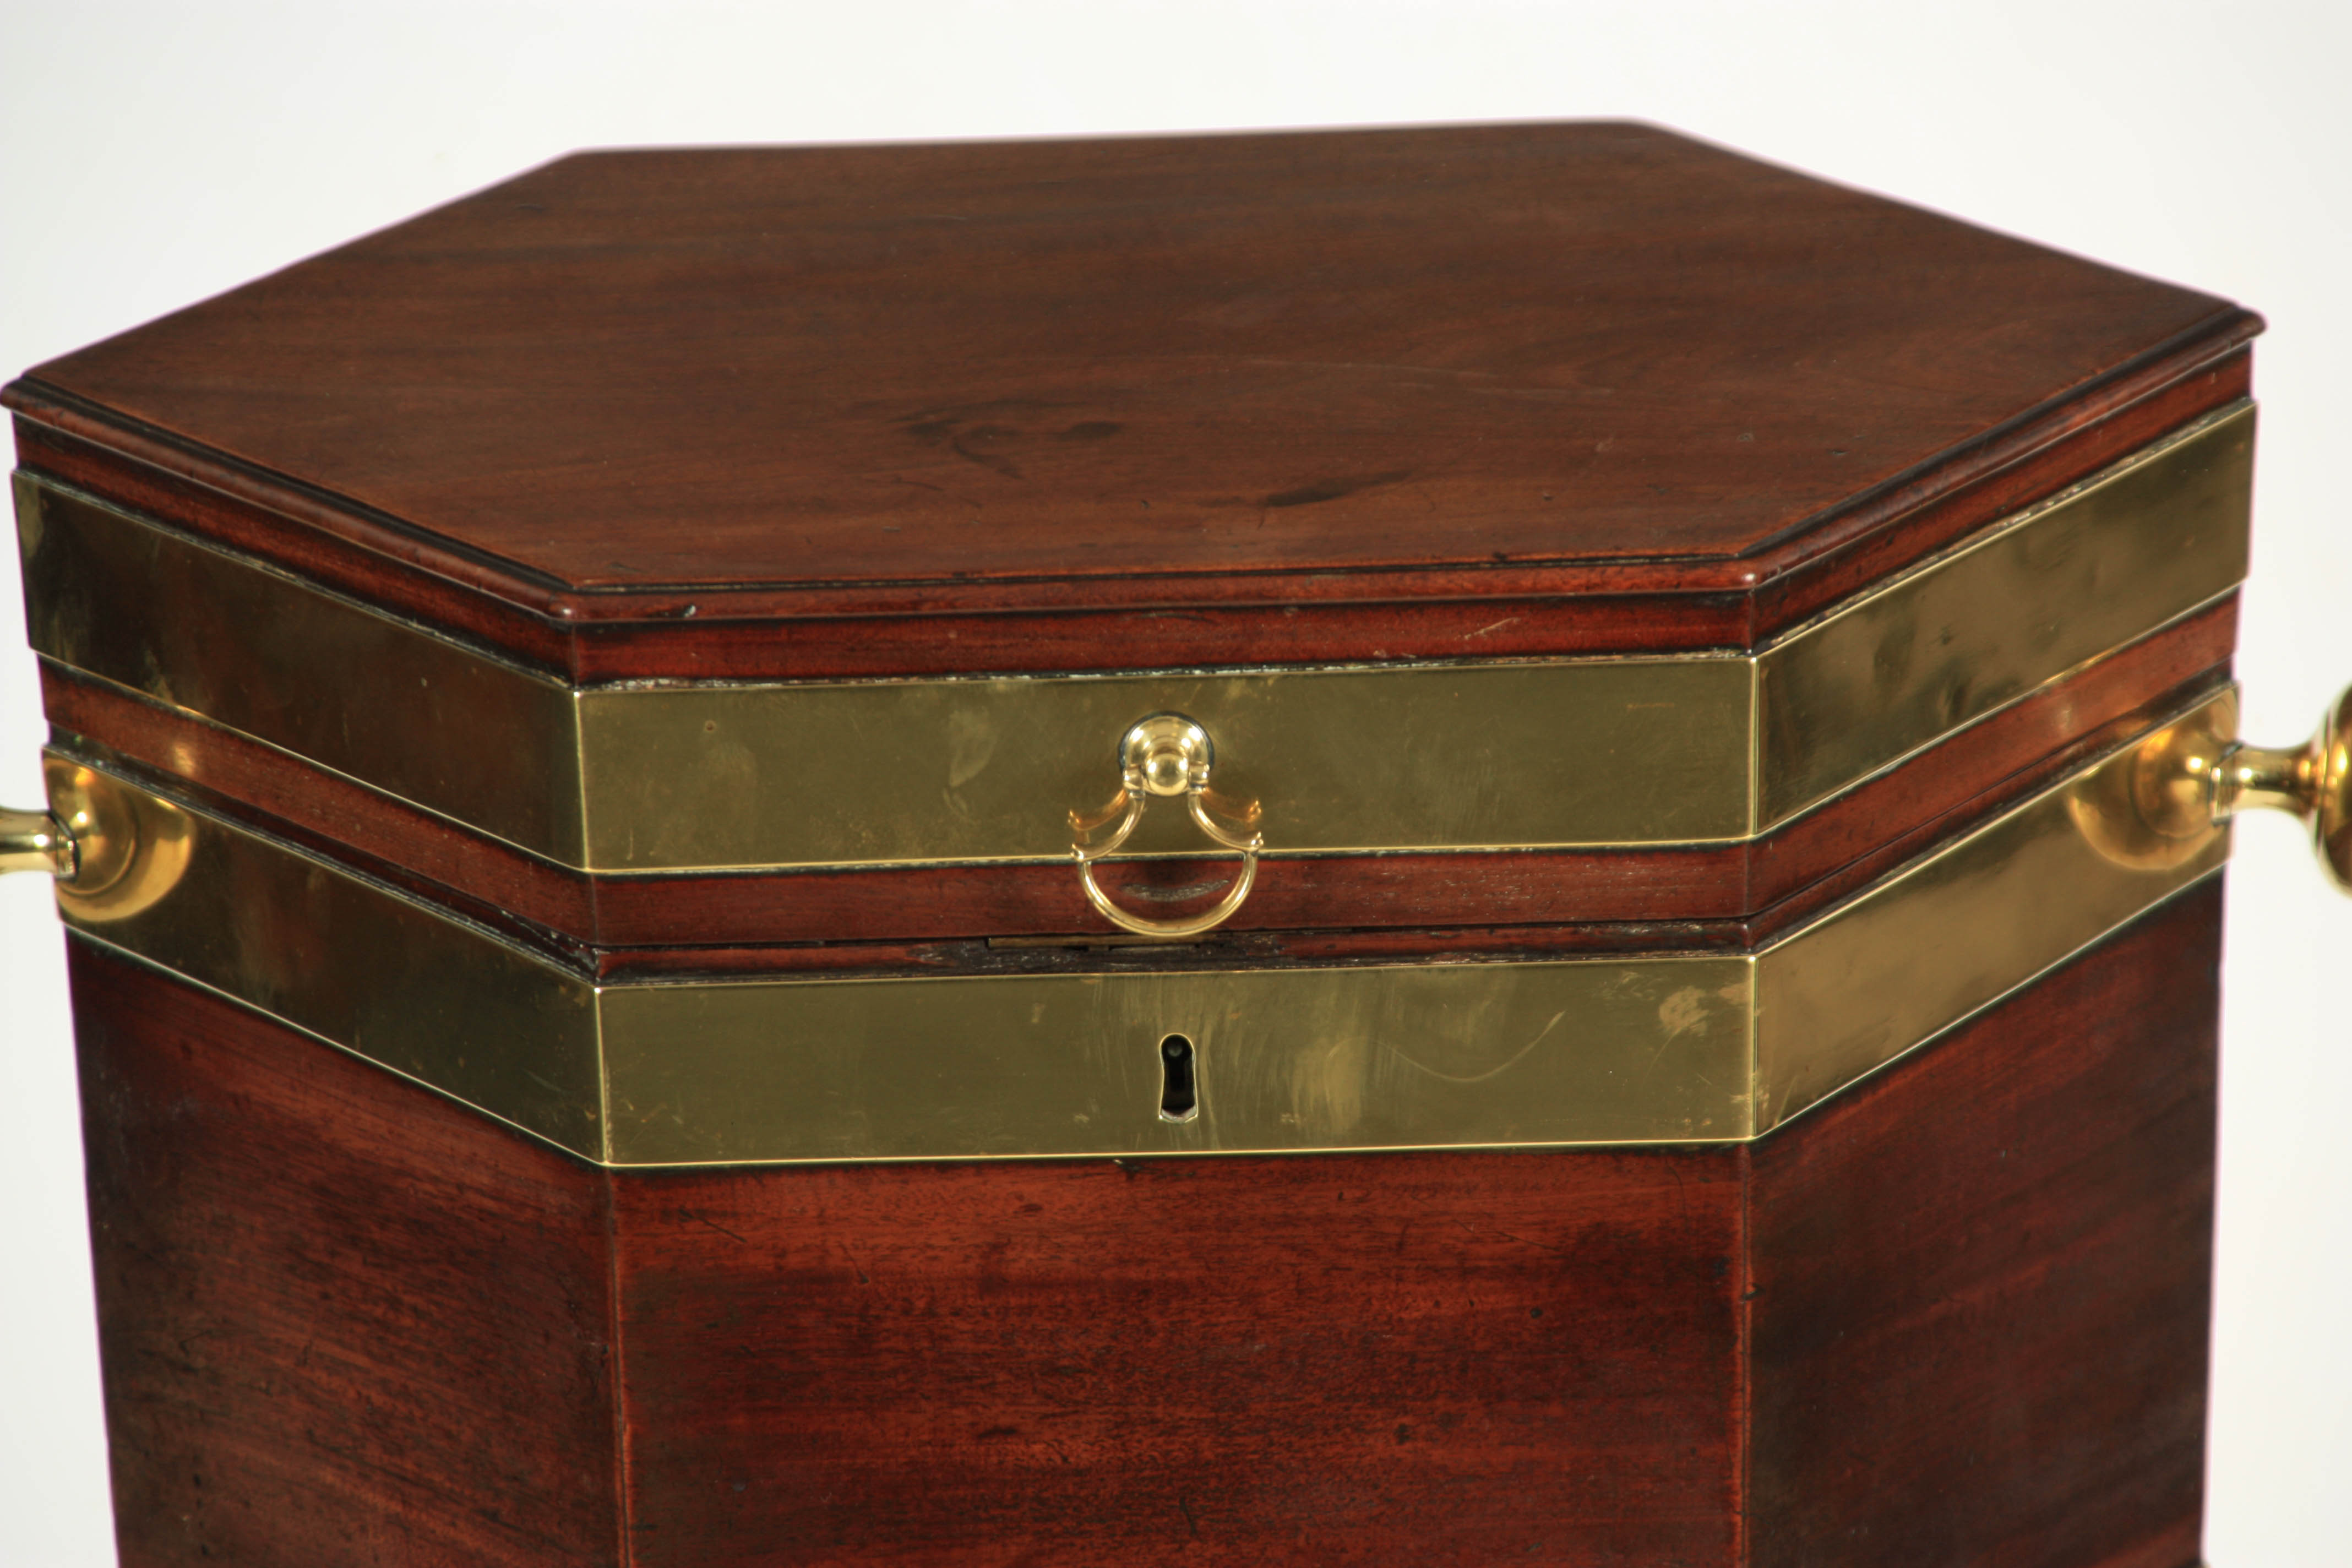 A GEORGE III MAHOGANY BRASS BOUND HEXAGONAL SHAPED CELLARETTE ON STAND with hinged top revealing a - Image 3 of 6